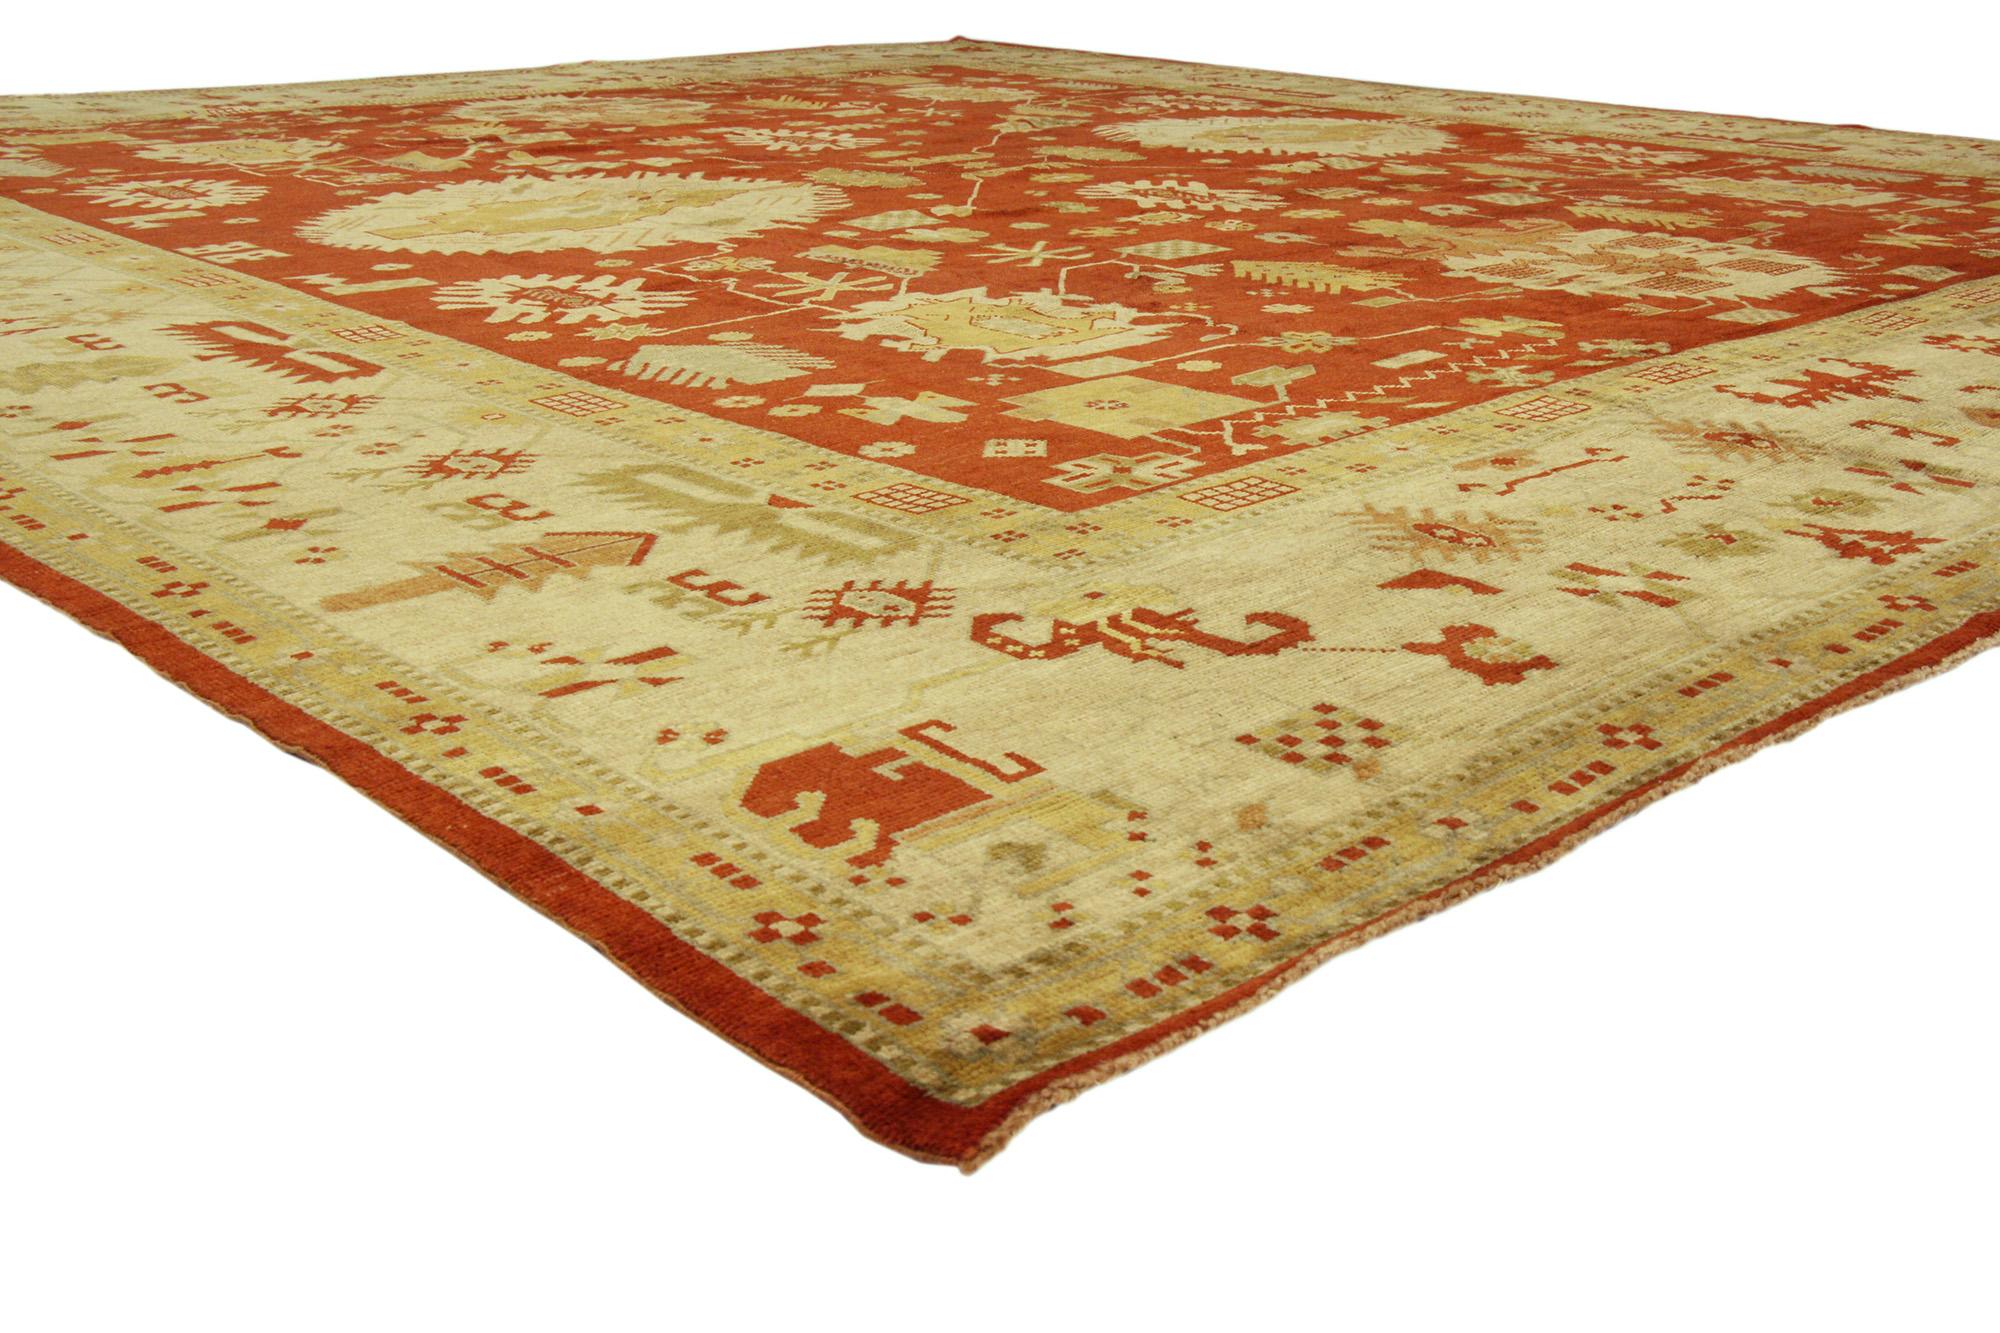 74066 Modern Red Turkish Oushak Rug, 13'04 x 15'02. In this hand-knotted wool modern Turkish Oushak rug, contemporary elegance intertwines seamlessly with Anatolian charm, creating a captivating fusion of styles. Across an abrashed rustic red